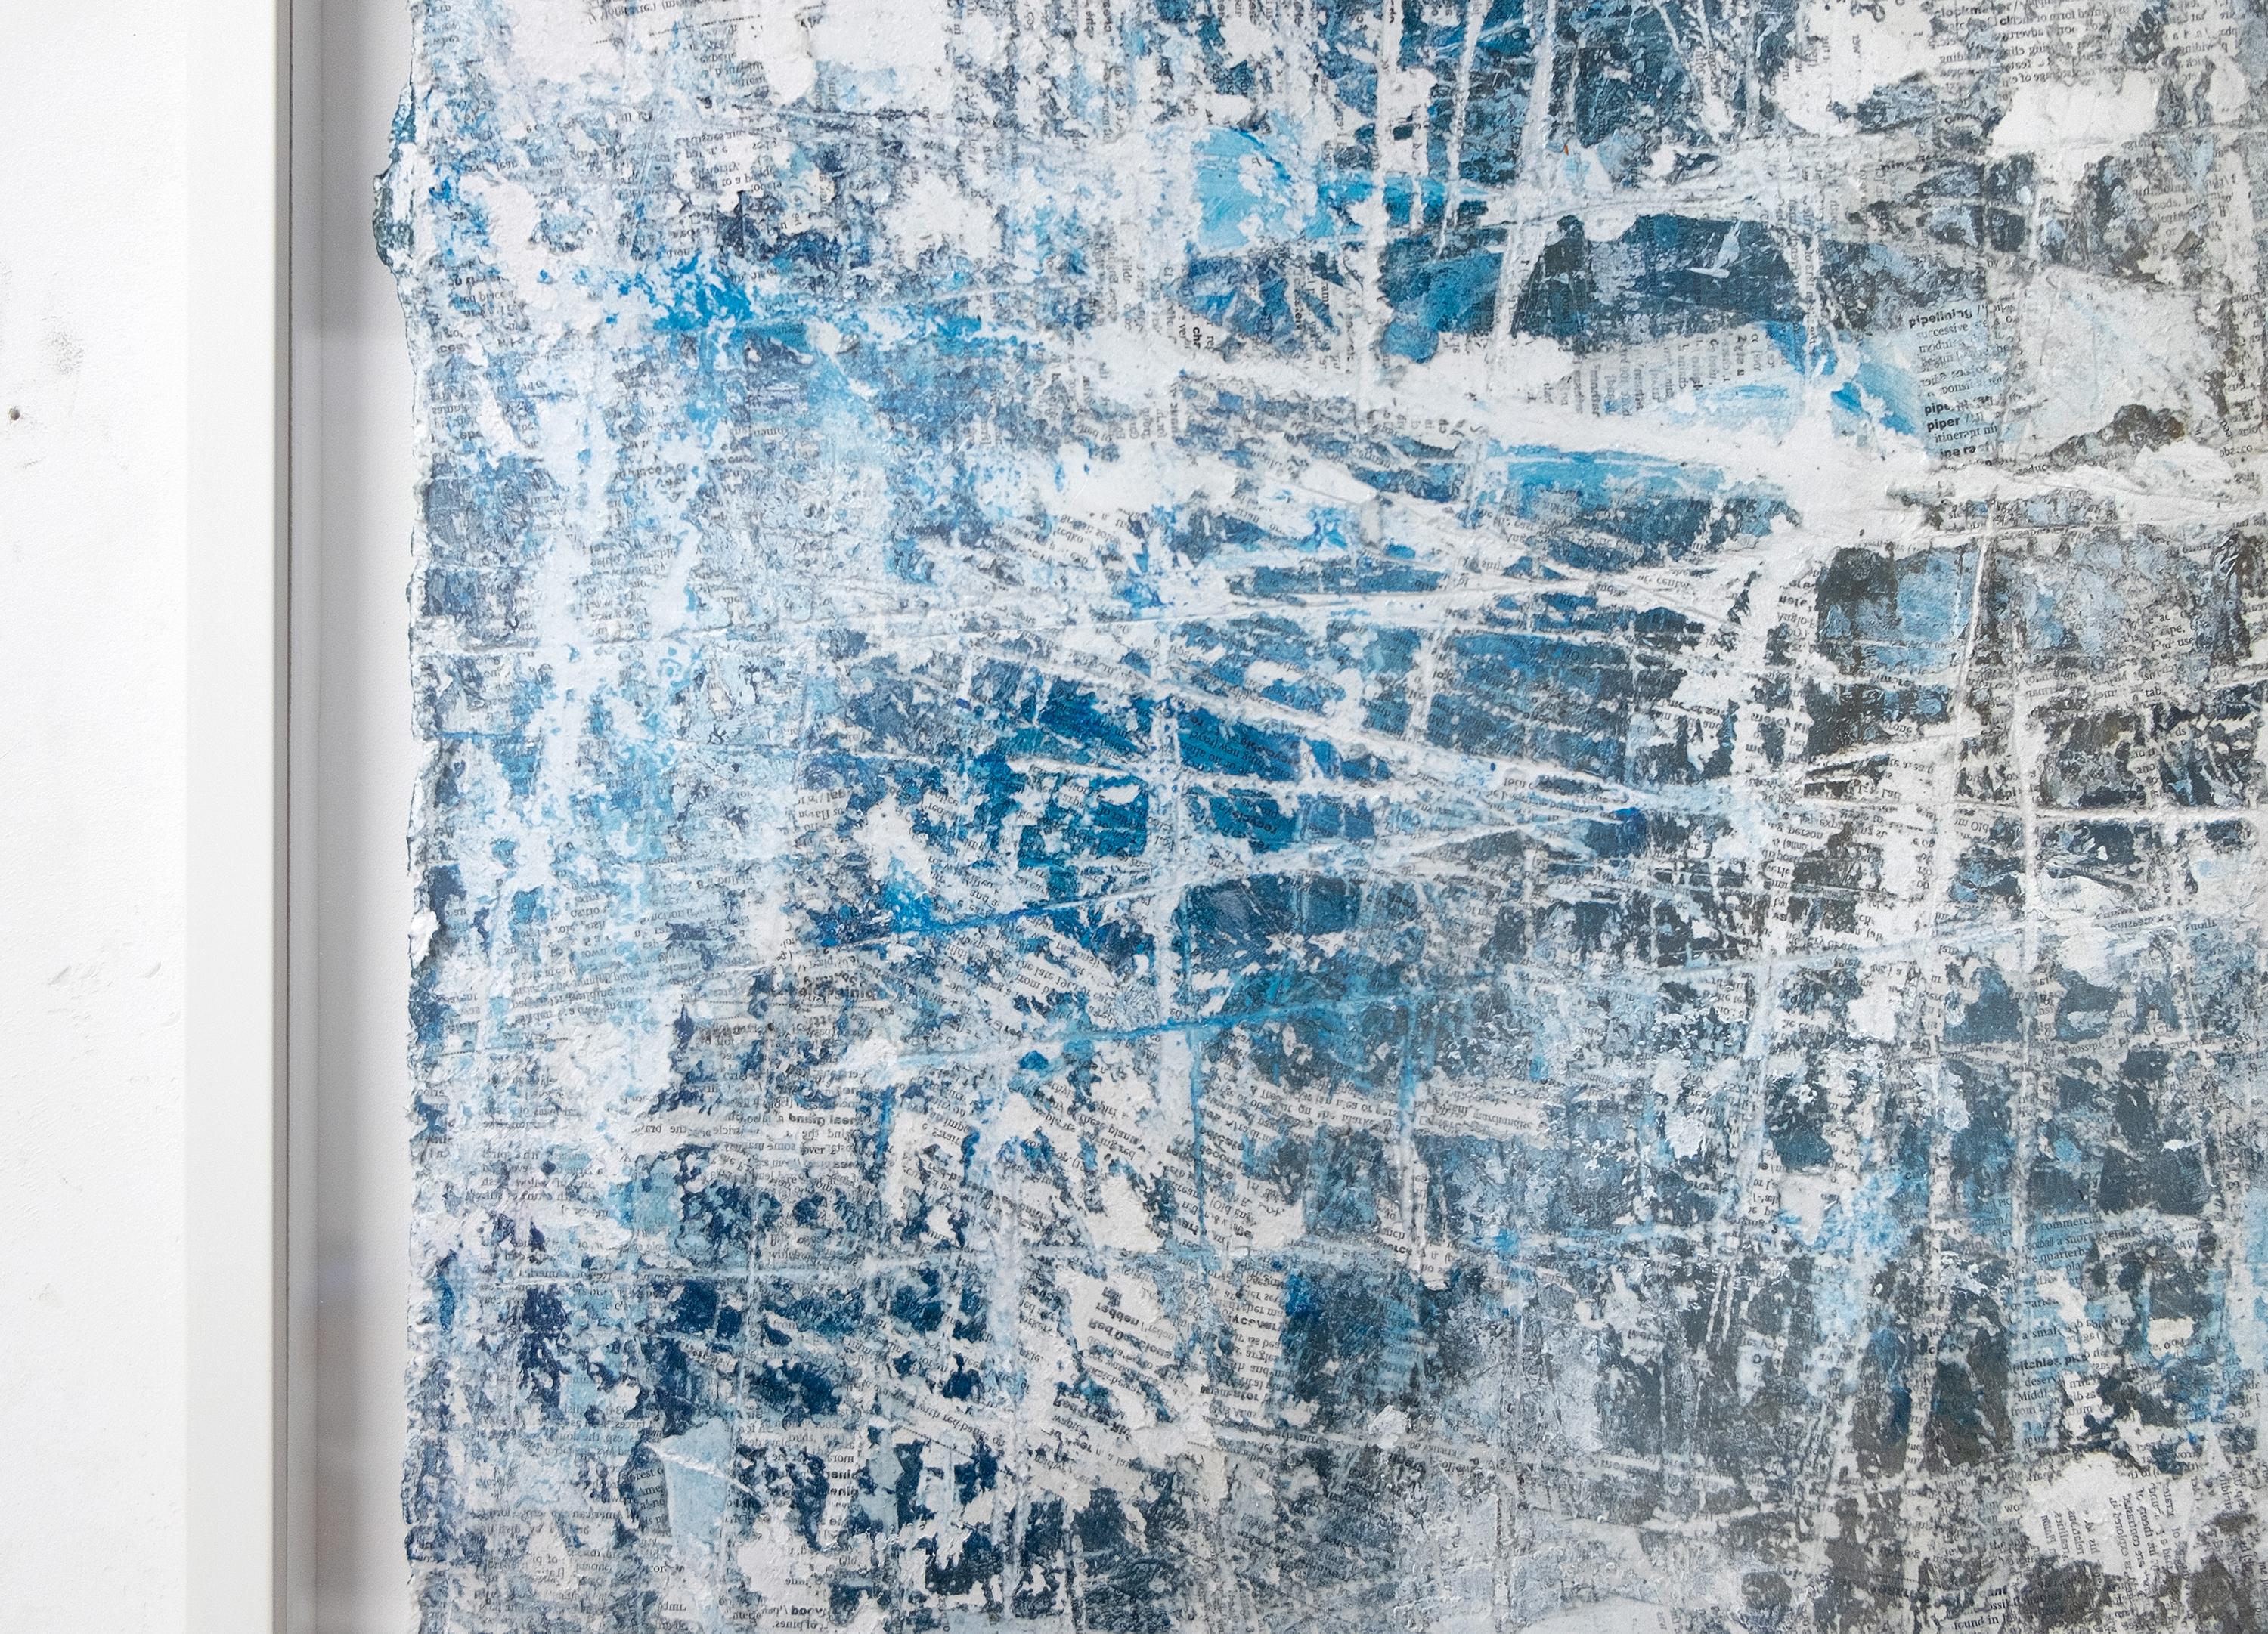 Breathing - textural blue and white abstract painting on paper framed - Art by David Fredrik Moussallem